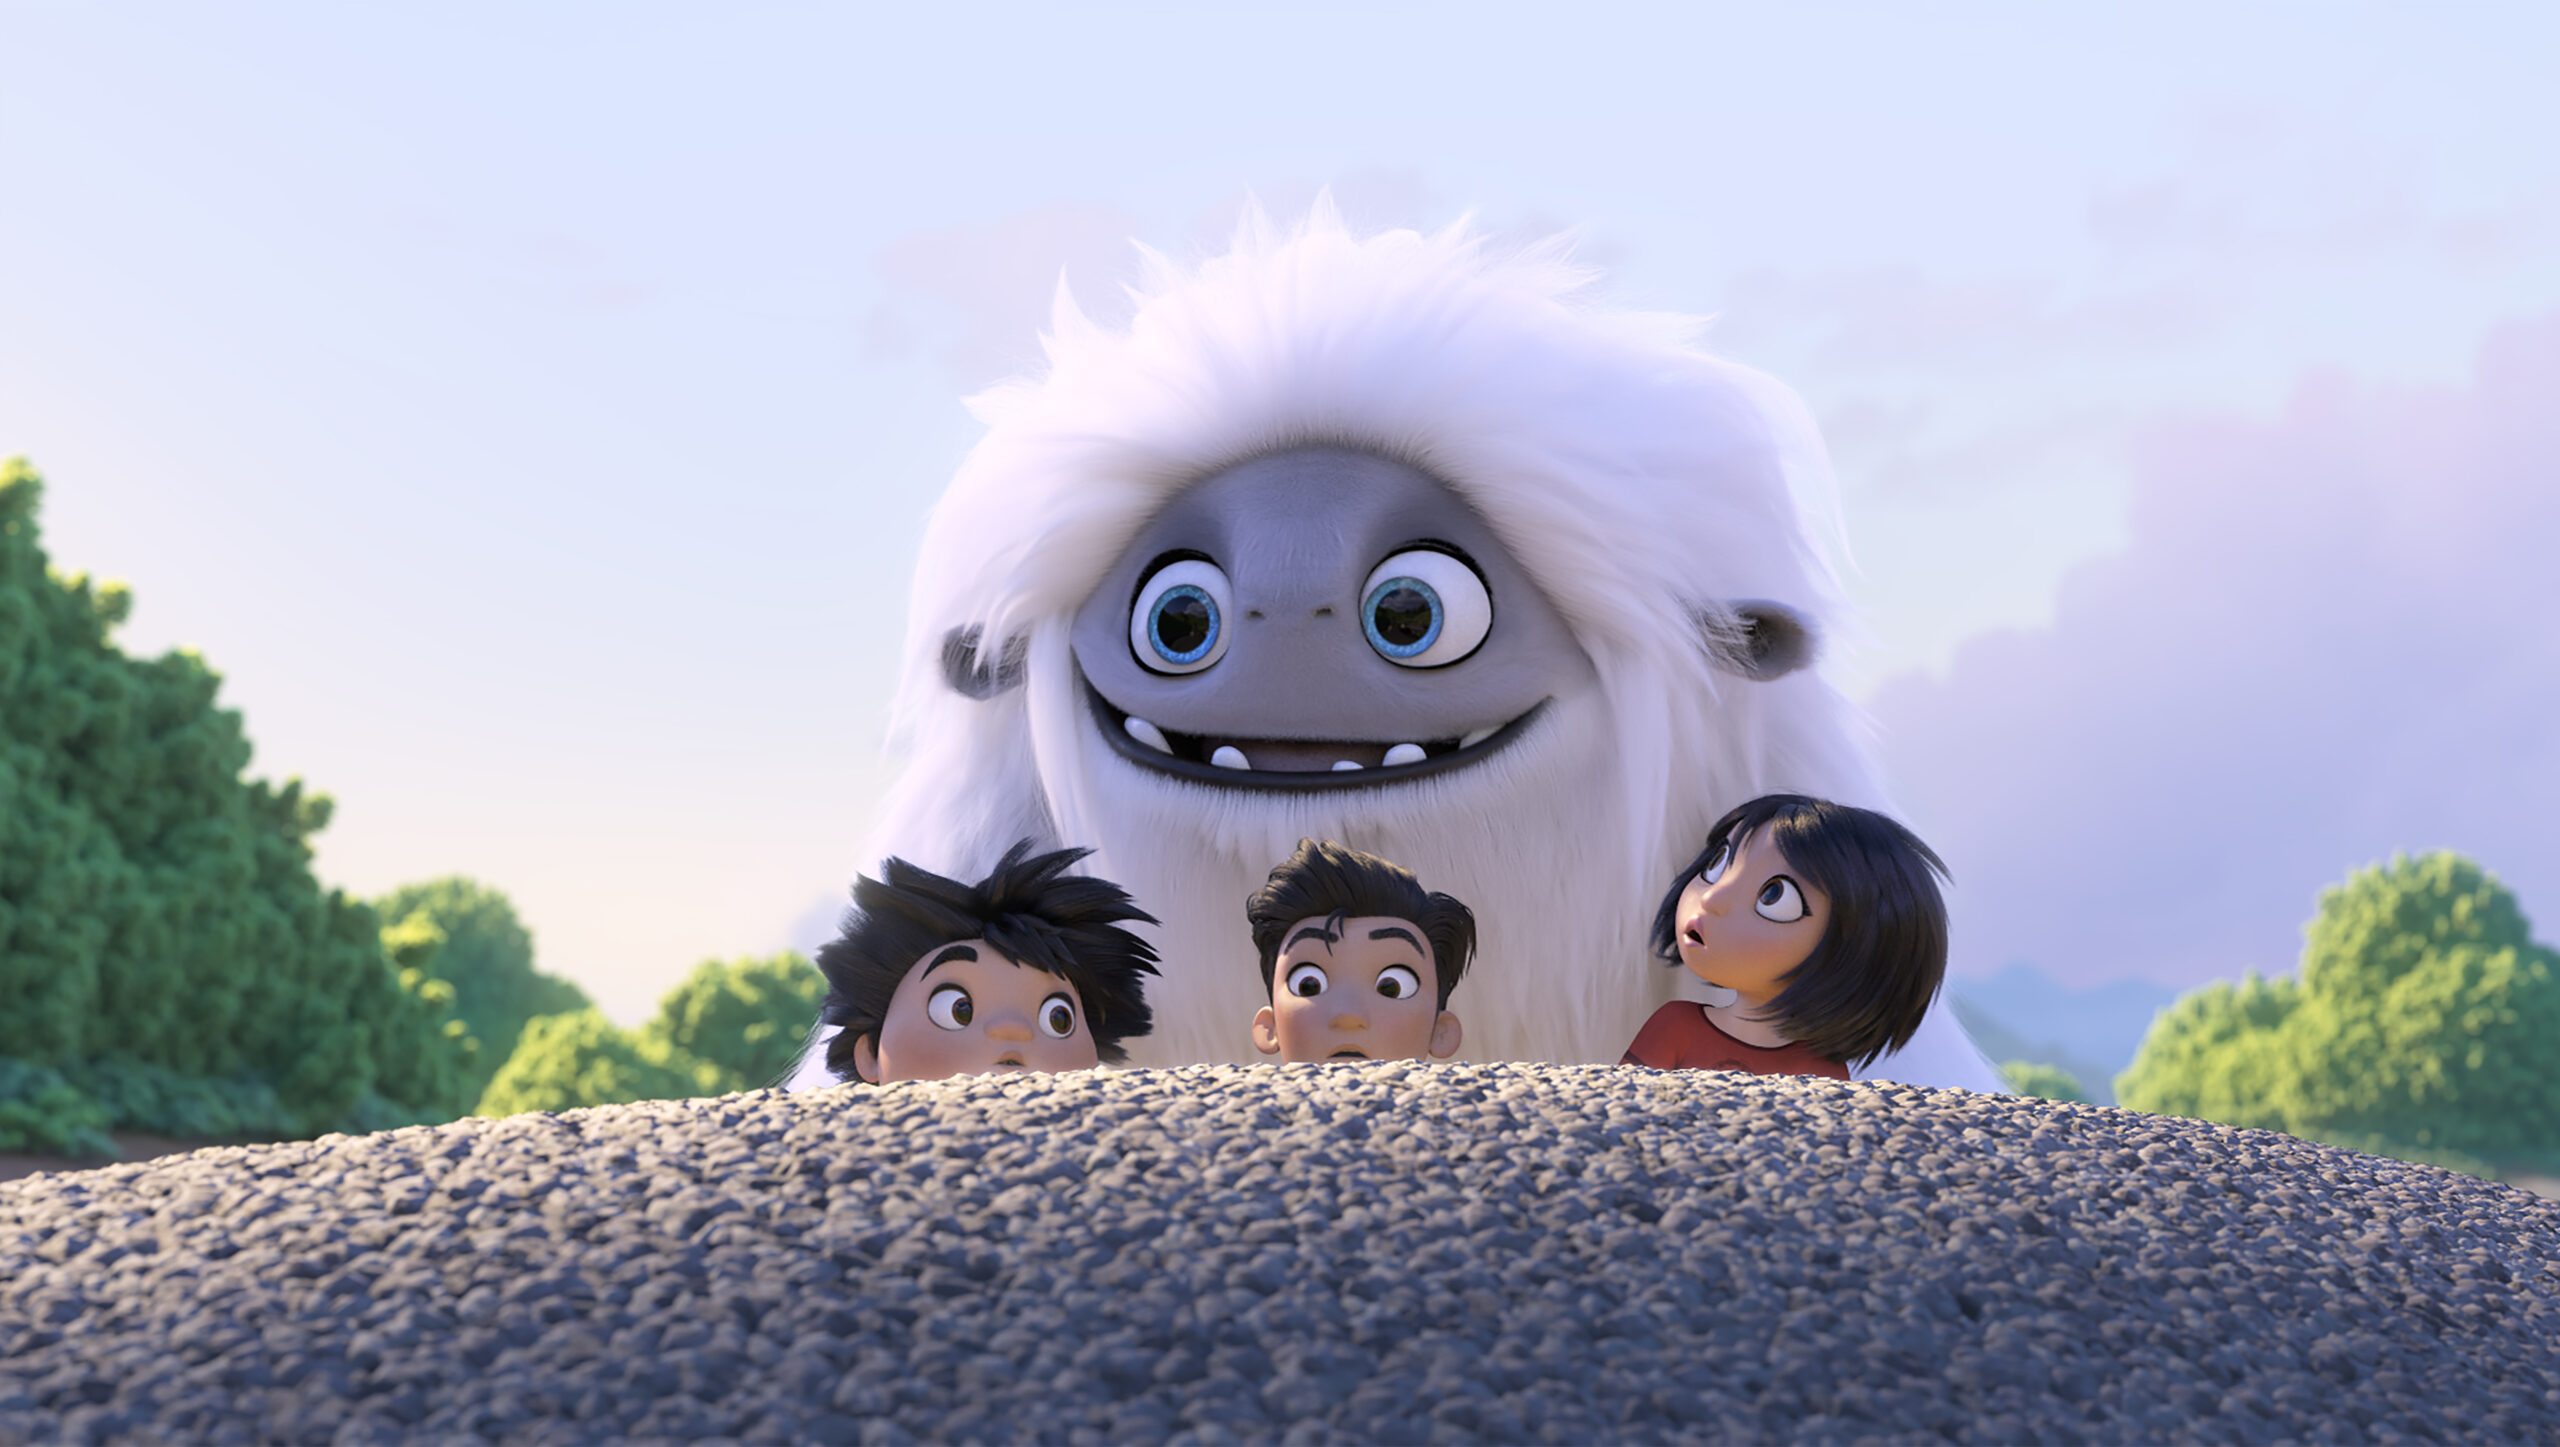 From left, Peng (Albert Tsai), Jin (Tenzing Norgay Trainor) and Yi (Chloe Bennet) are on the lookout and on the run with the Yeti, Everest, in DreamWorks Animation and Pearl Studio’s "Abominable," written and directed by Jill Culton.